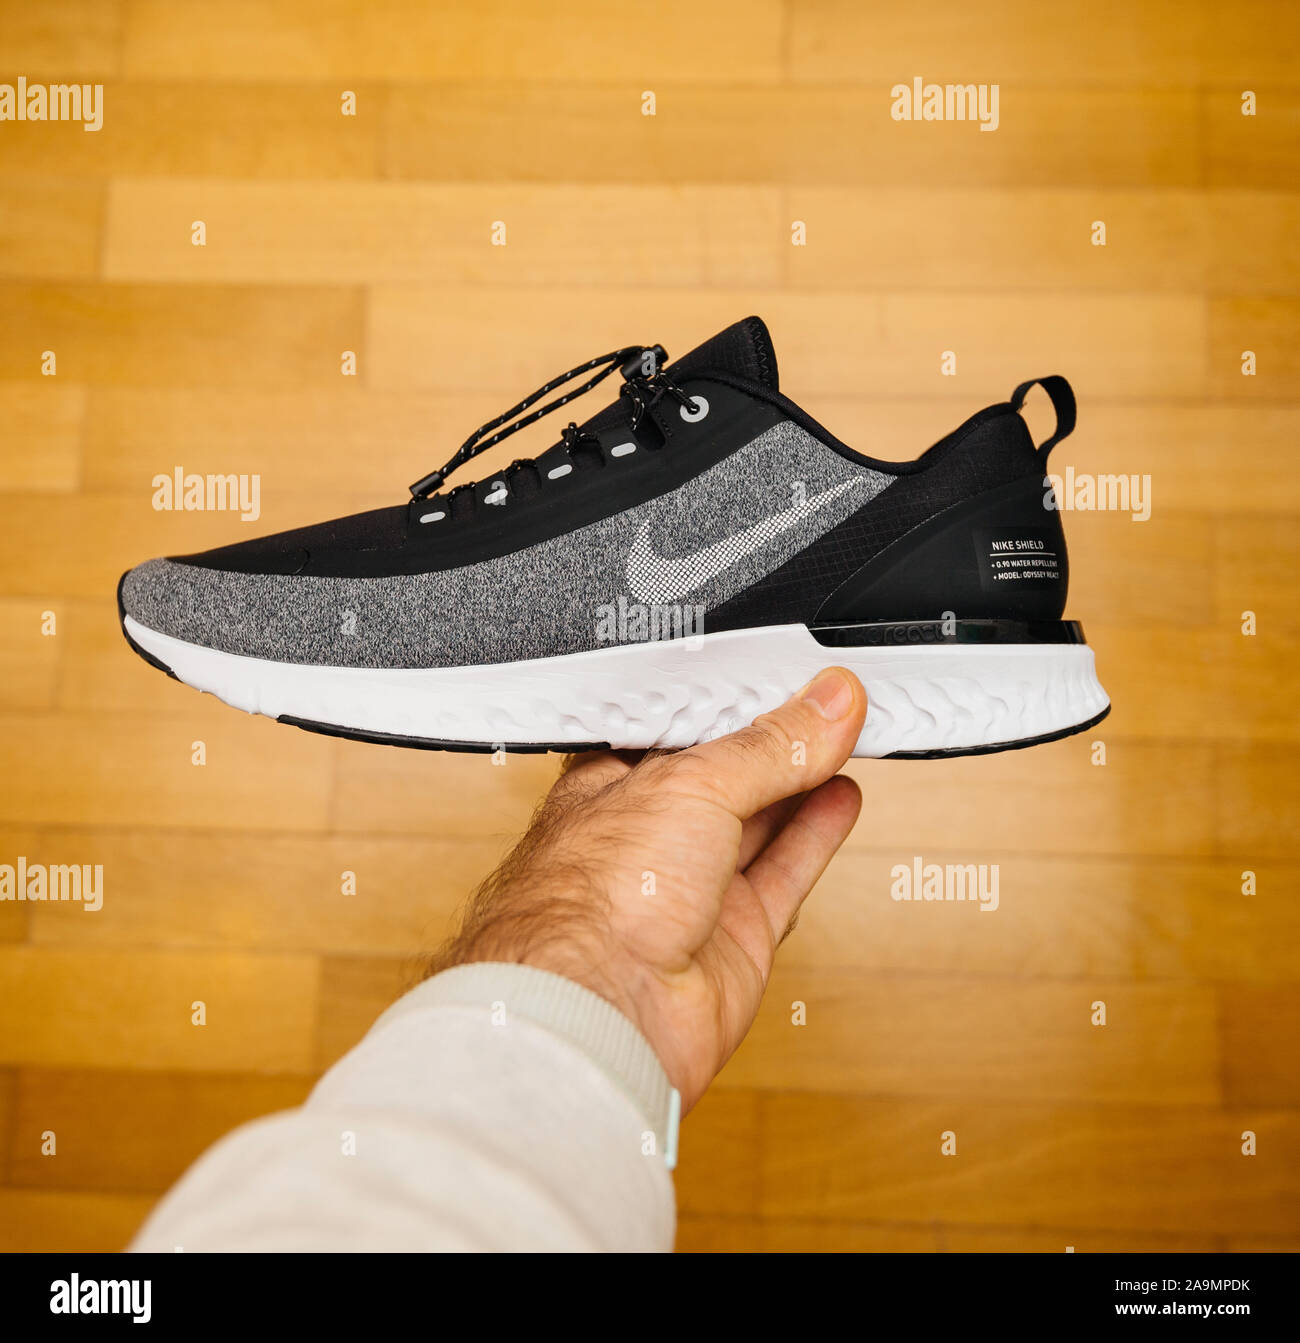 Paris, France - Oct 18, 2019: Square image POV man hand holding against  wooden floor gym background new sport waterproof and windproof running shoe  Nike Odyssey React Shield 2 Stock Photo - Alamy